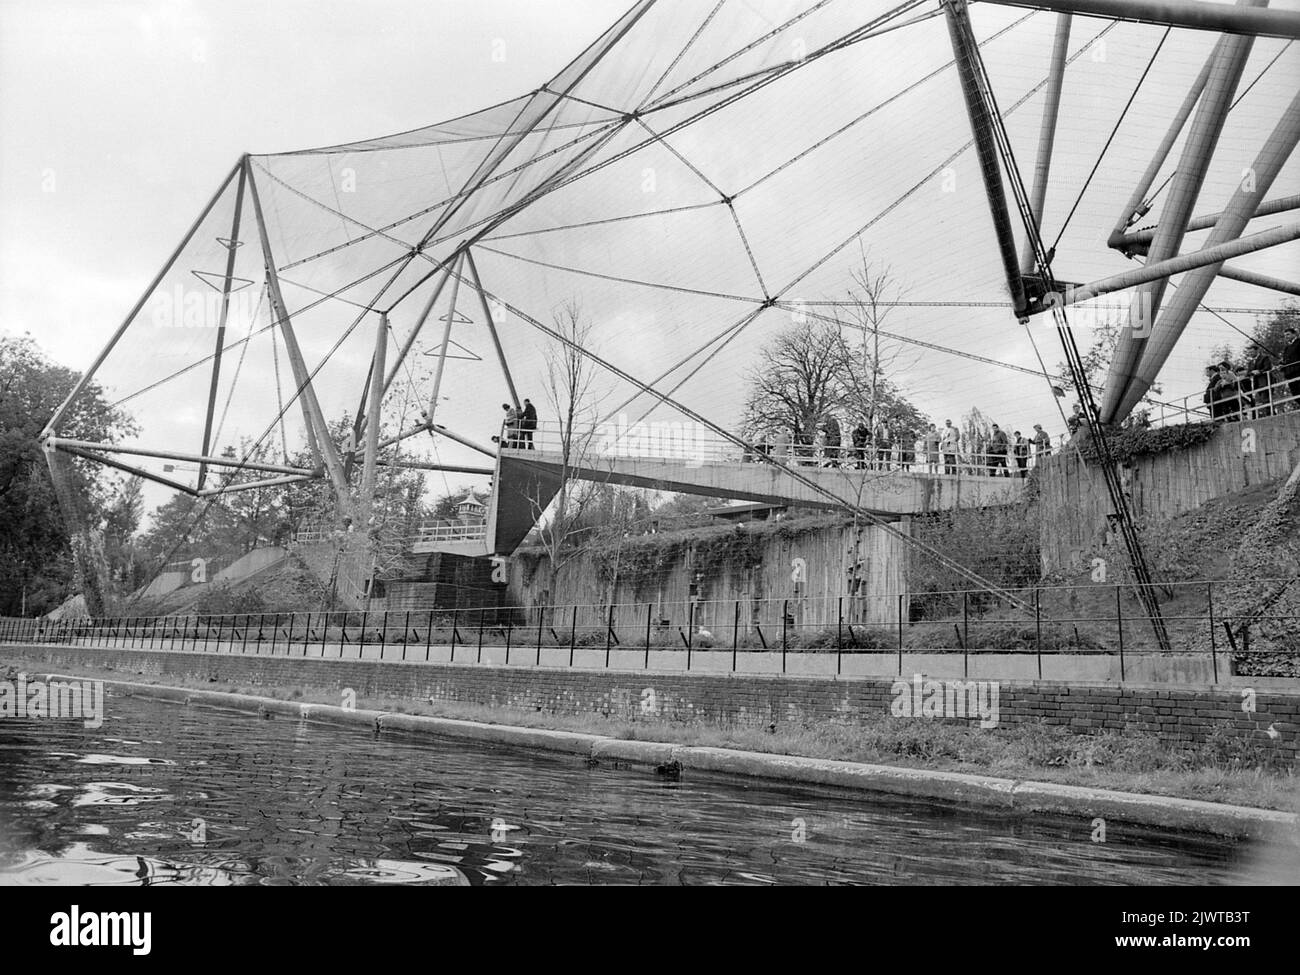 London, England, circa 1967. A view of London Zoo’s Snowdon Aviary from the Regent’s Canal. Built-in 1964, The Snowdon Aviary was designed by Frank Newby, Cedric Price, and Antony Armstrong-Jones, 1st Earl of Snowdon. It was Britain's first public, walk-through aviary. London Zoo (also known as London Zoological Gardens) is situated at the northern edge of Regent's Park, on the boundary between the City of Westminster and the borough of Camden. It is the world's oldest scientific zoo. Stock Photo